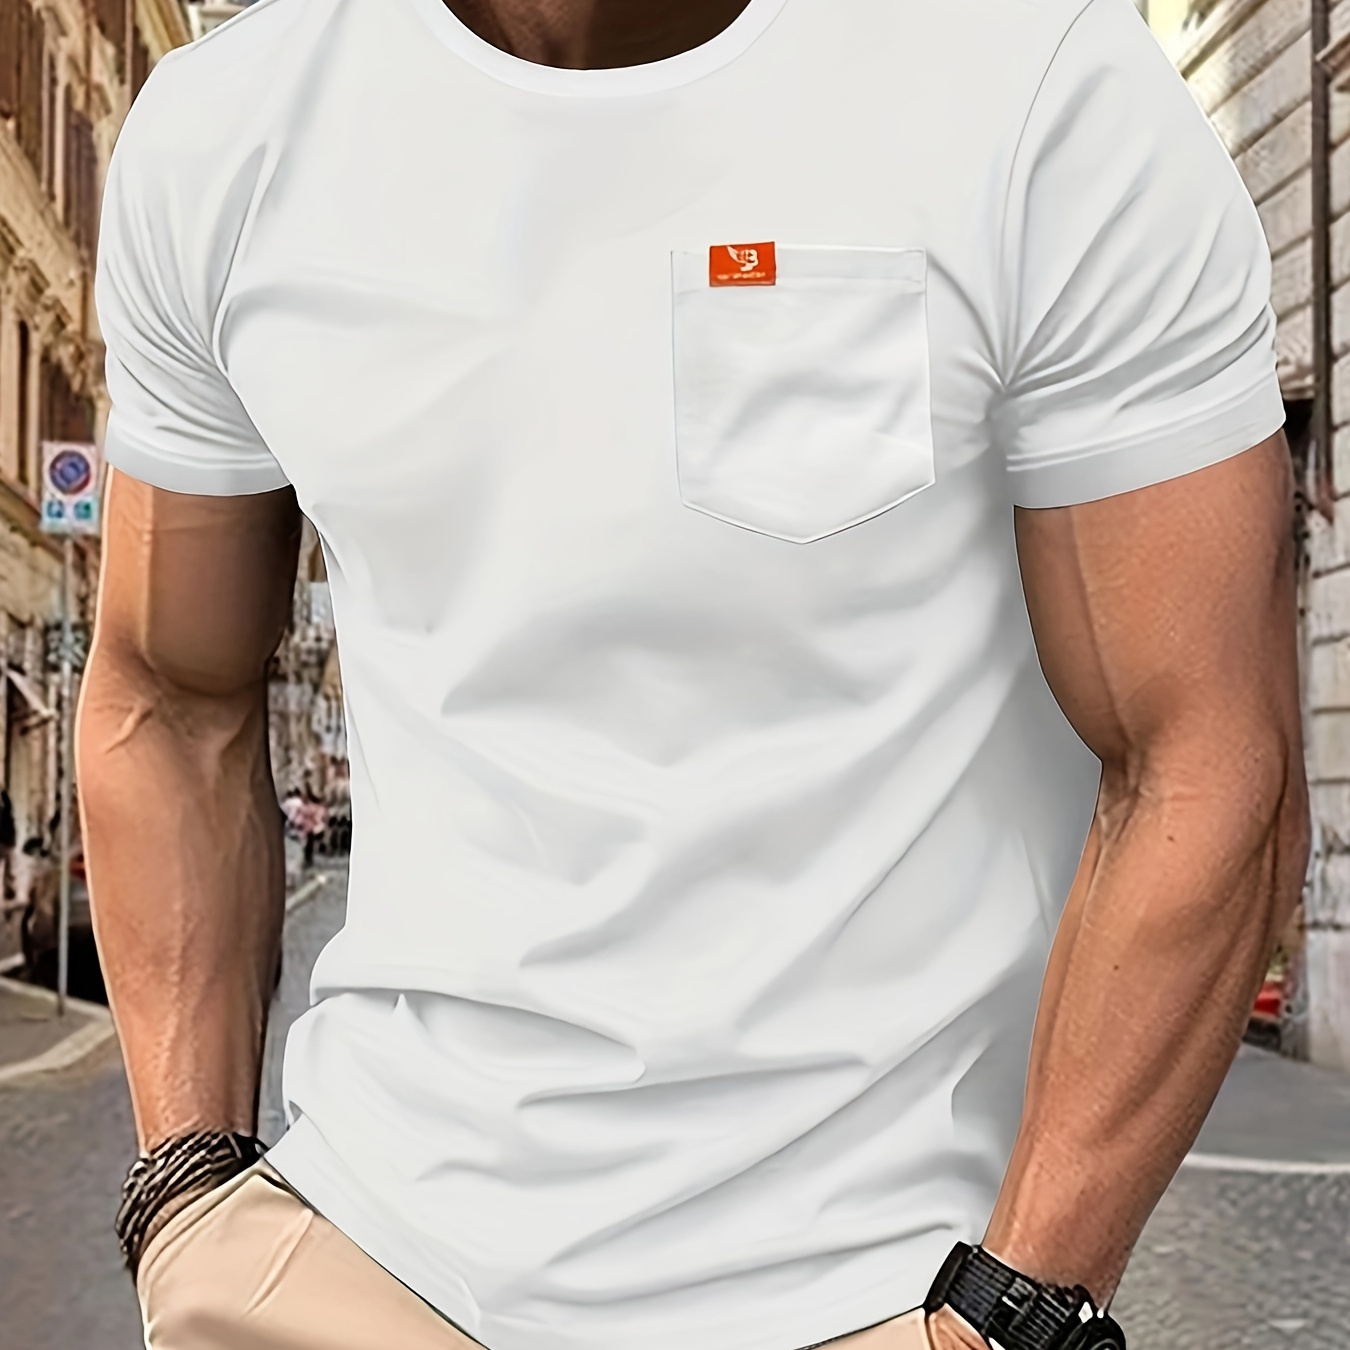 

Solid Color Crew Neck And Short Sleeve T-shirt With Breasted Pocket And Label Patchwork Piece, Casual And Trendy Tops For Men's Summer Outdoors And Sports Wear